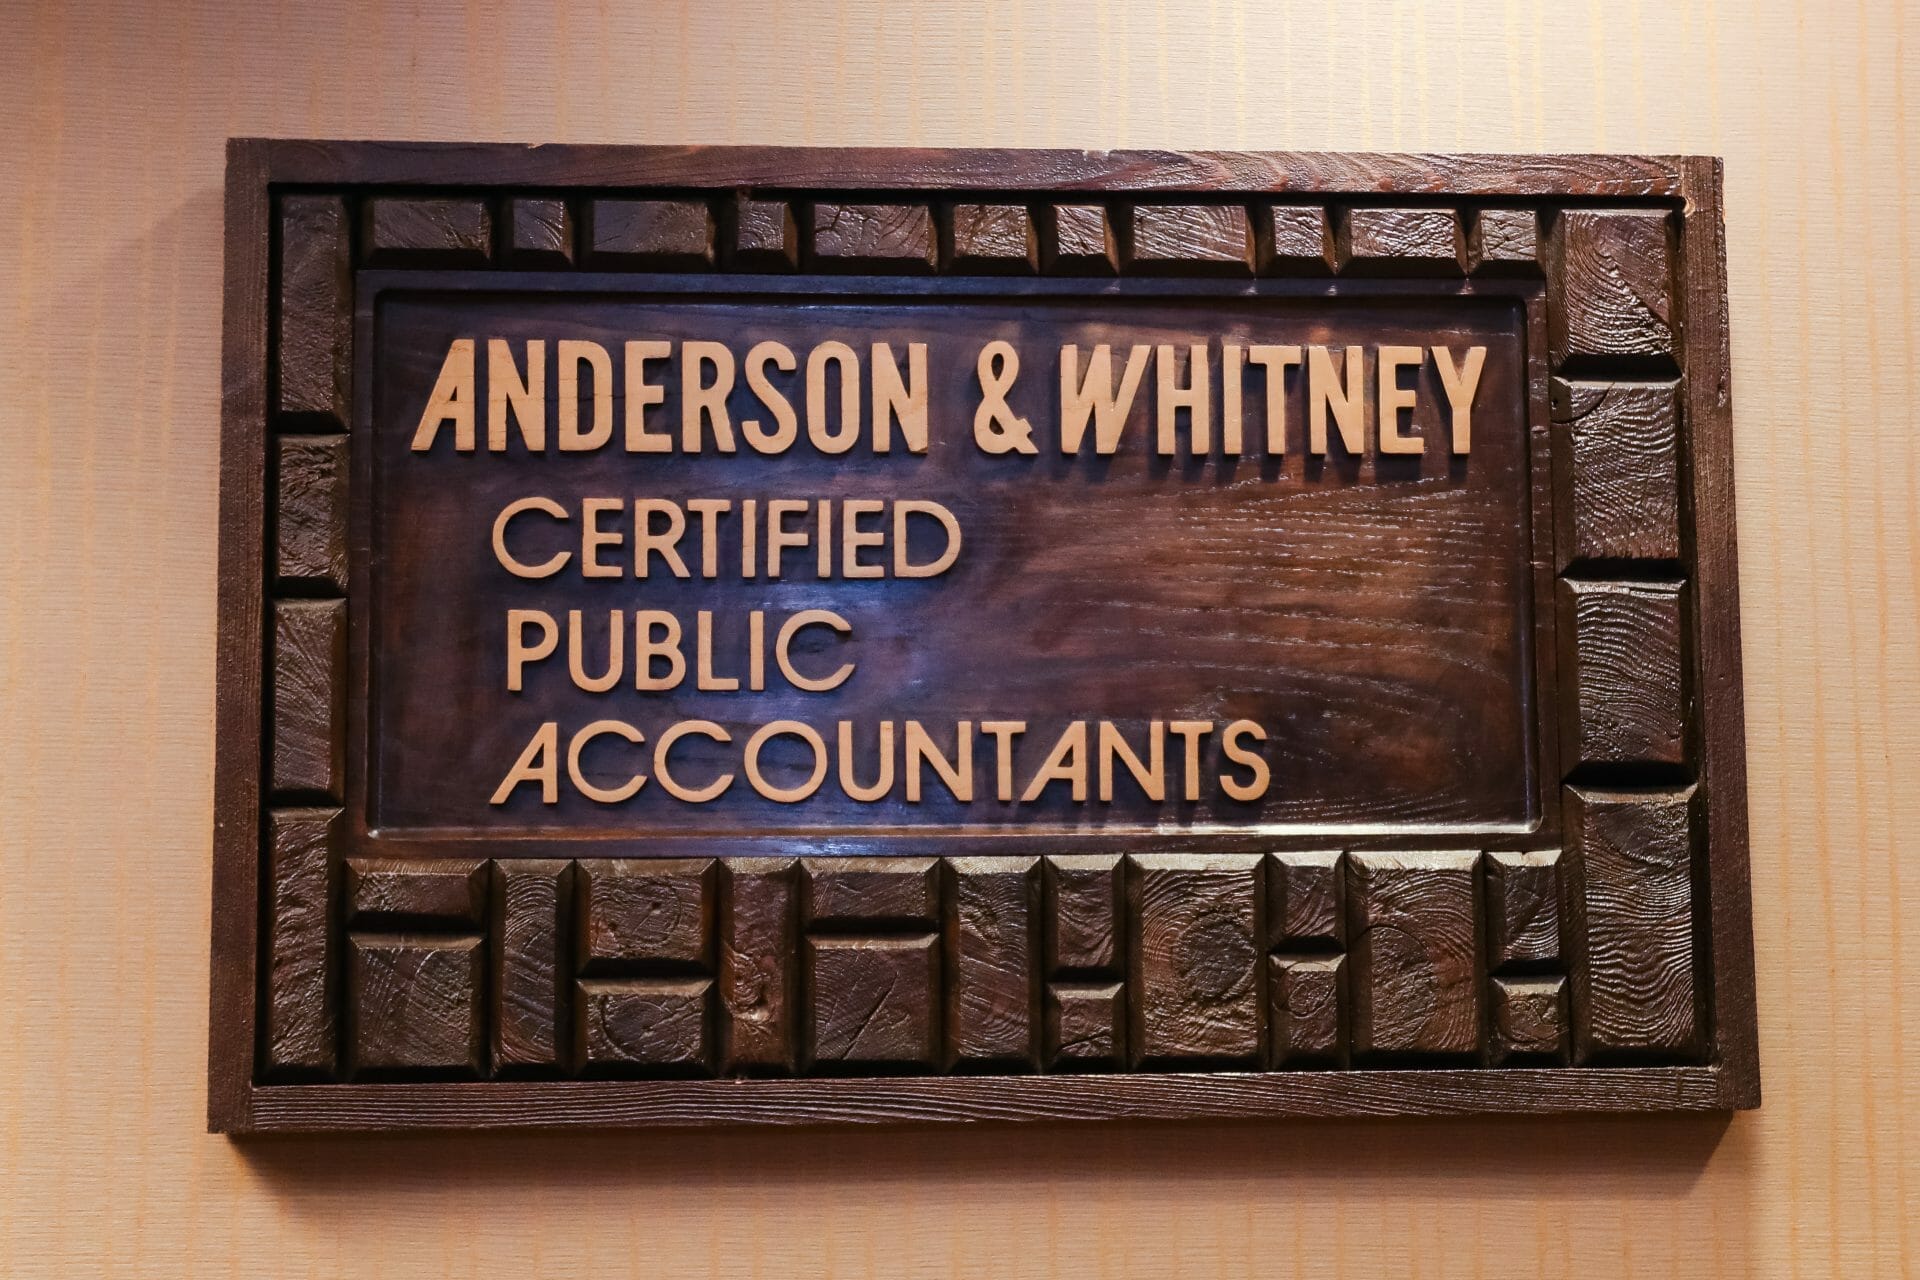 anderson & whitney certified public accountants sign